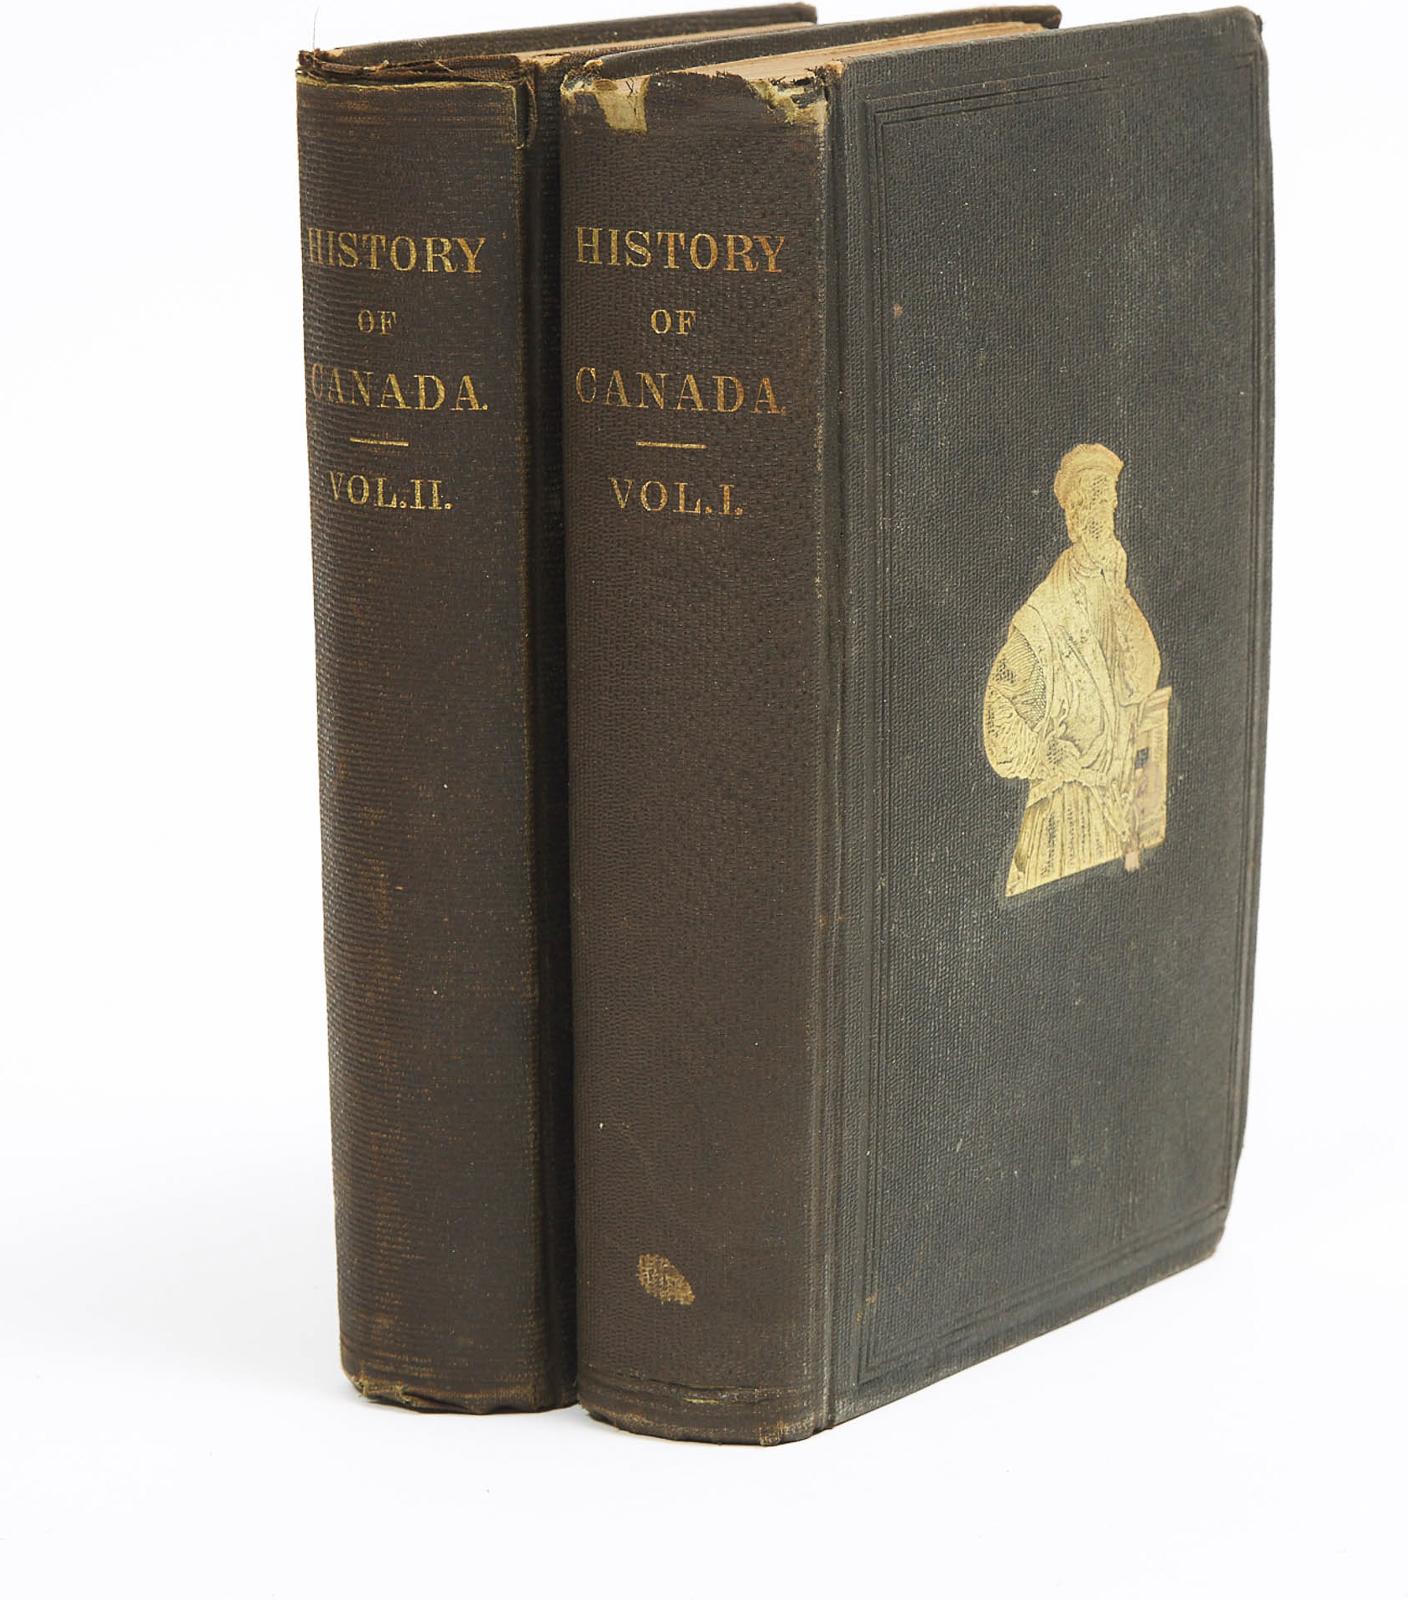 Andrew Bell (1971) - History Of Canada, From The Time Of Its Discovery Till The Union Year 1840-41